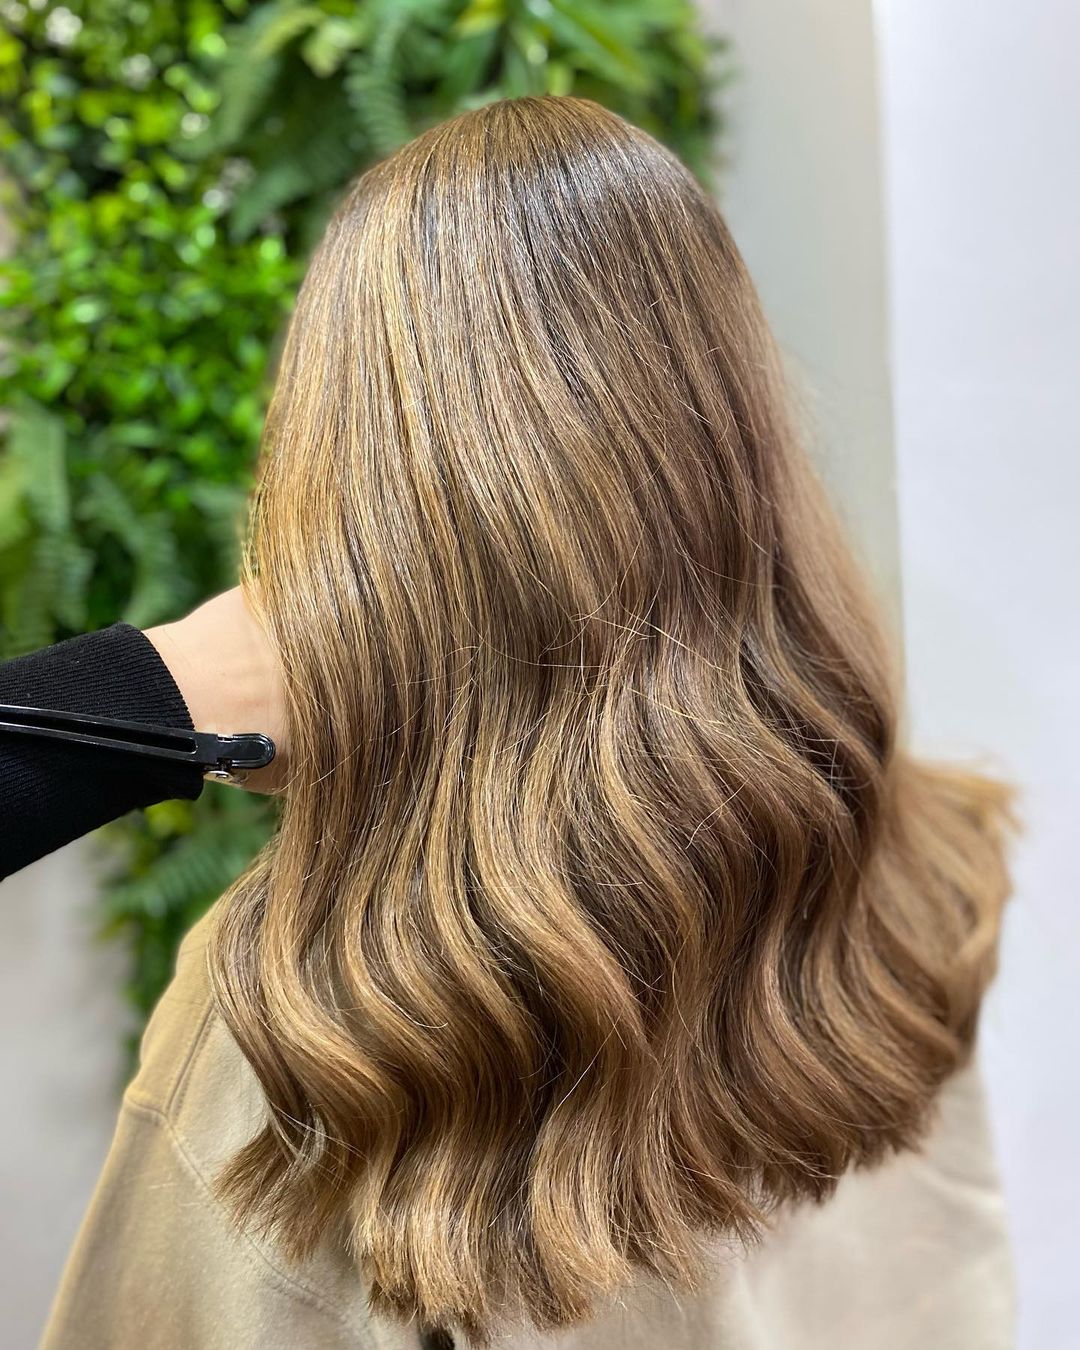 Balayage or Foils- which is the best way to highlight hair?